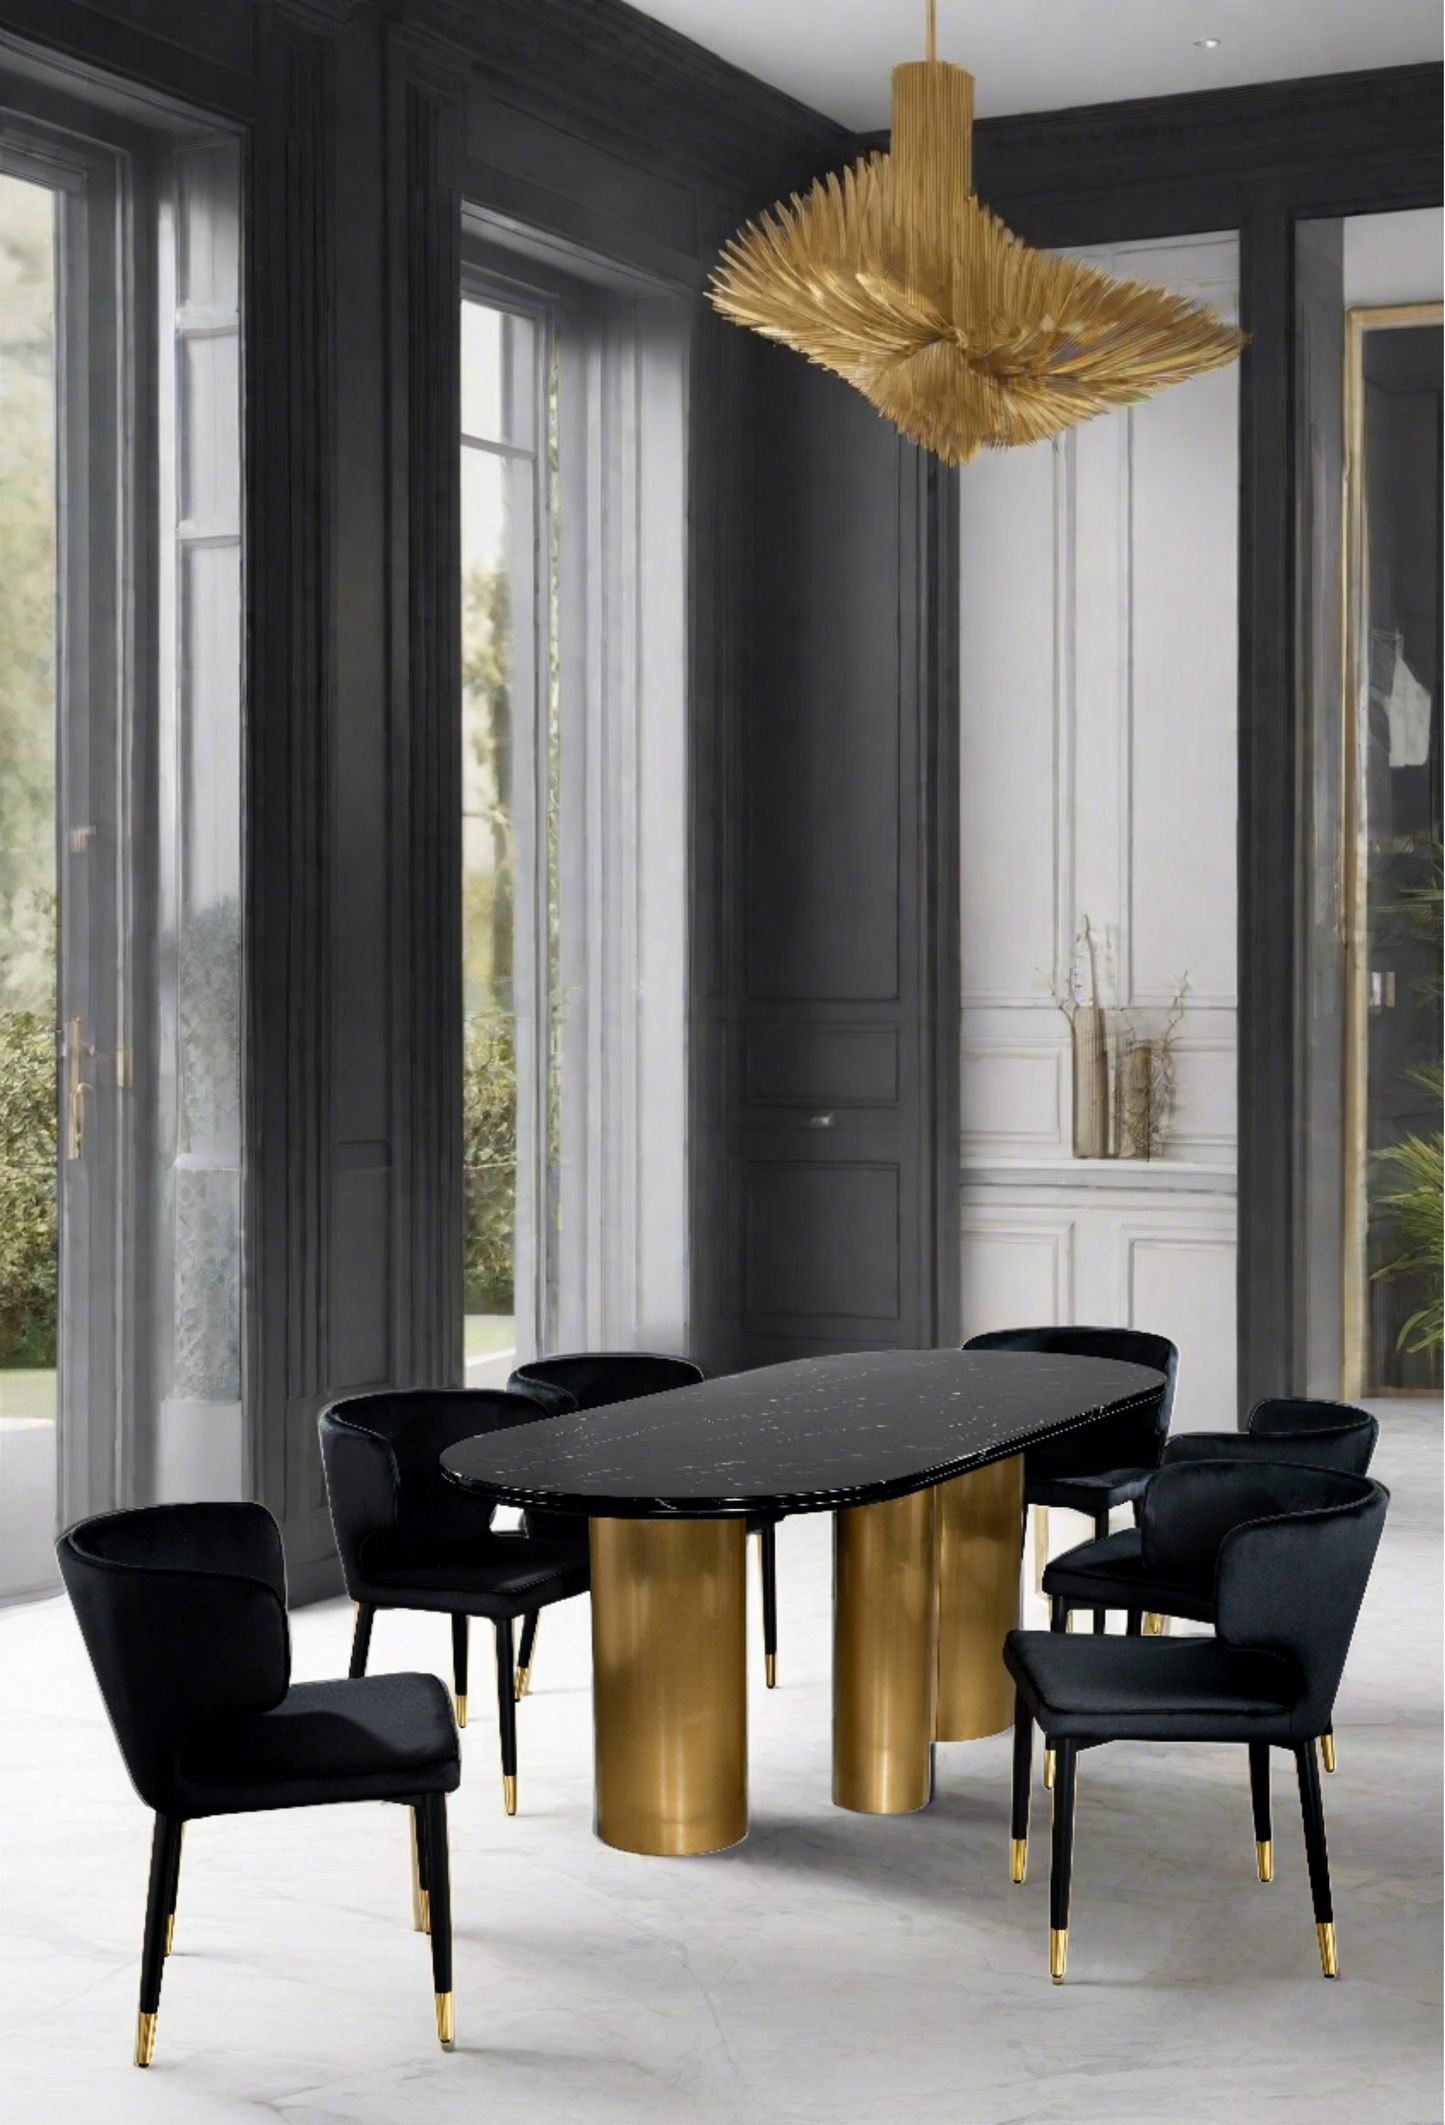 Balmain Marble Top Oval Dining Table for 6 with Black Chairs